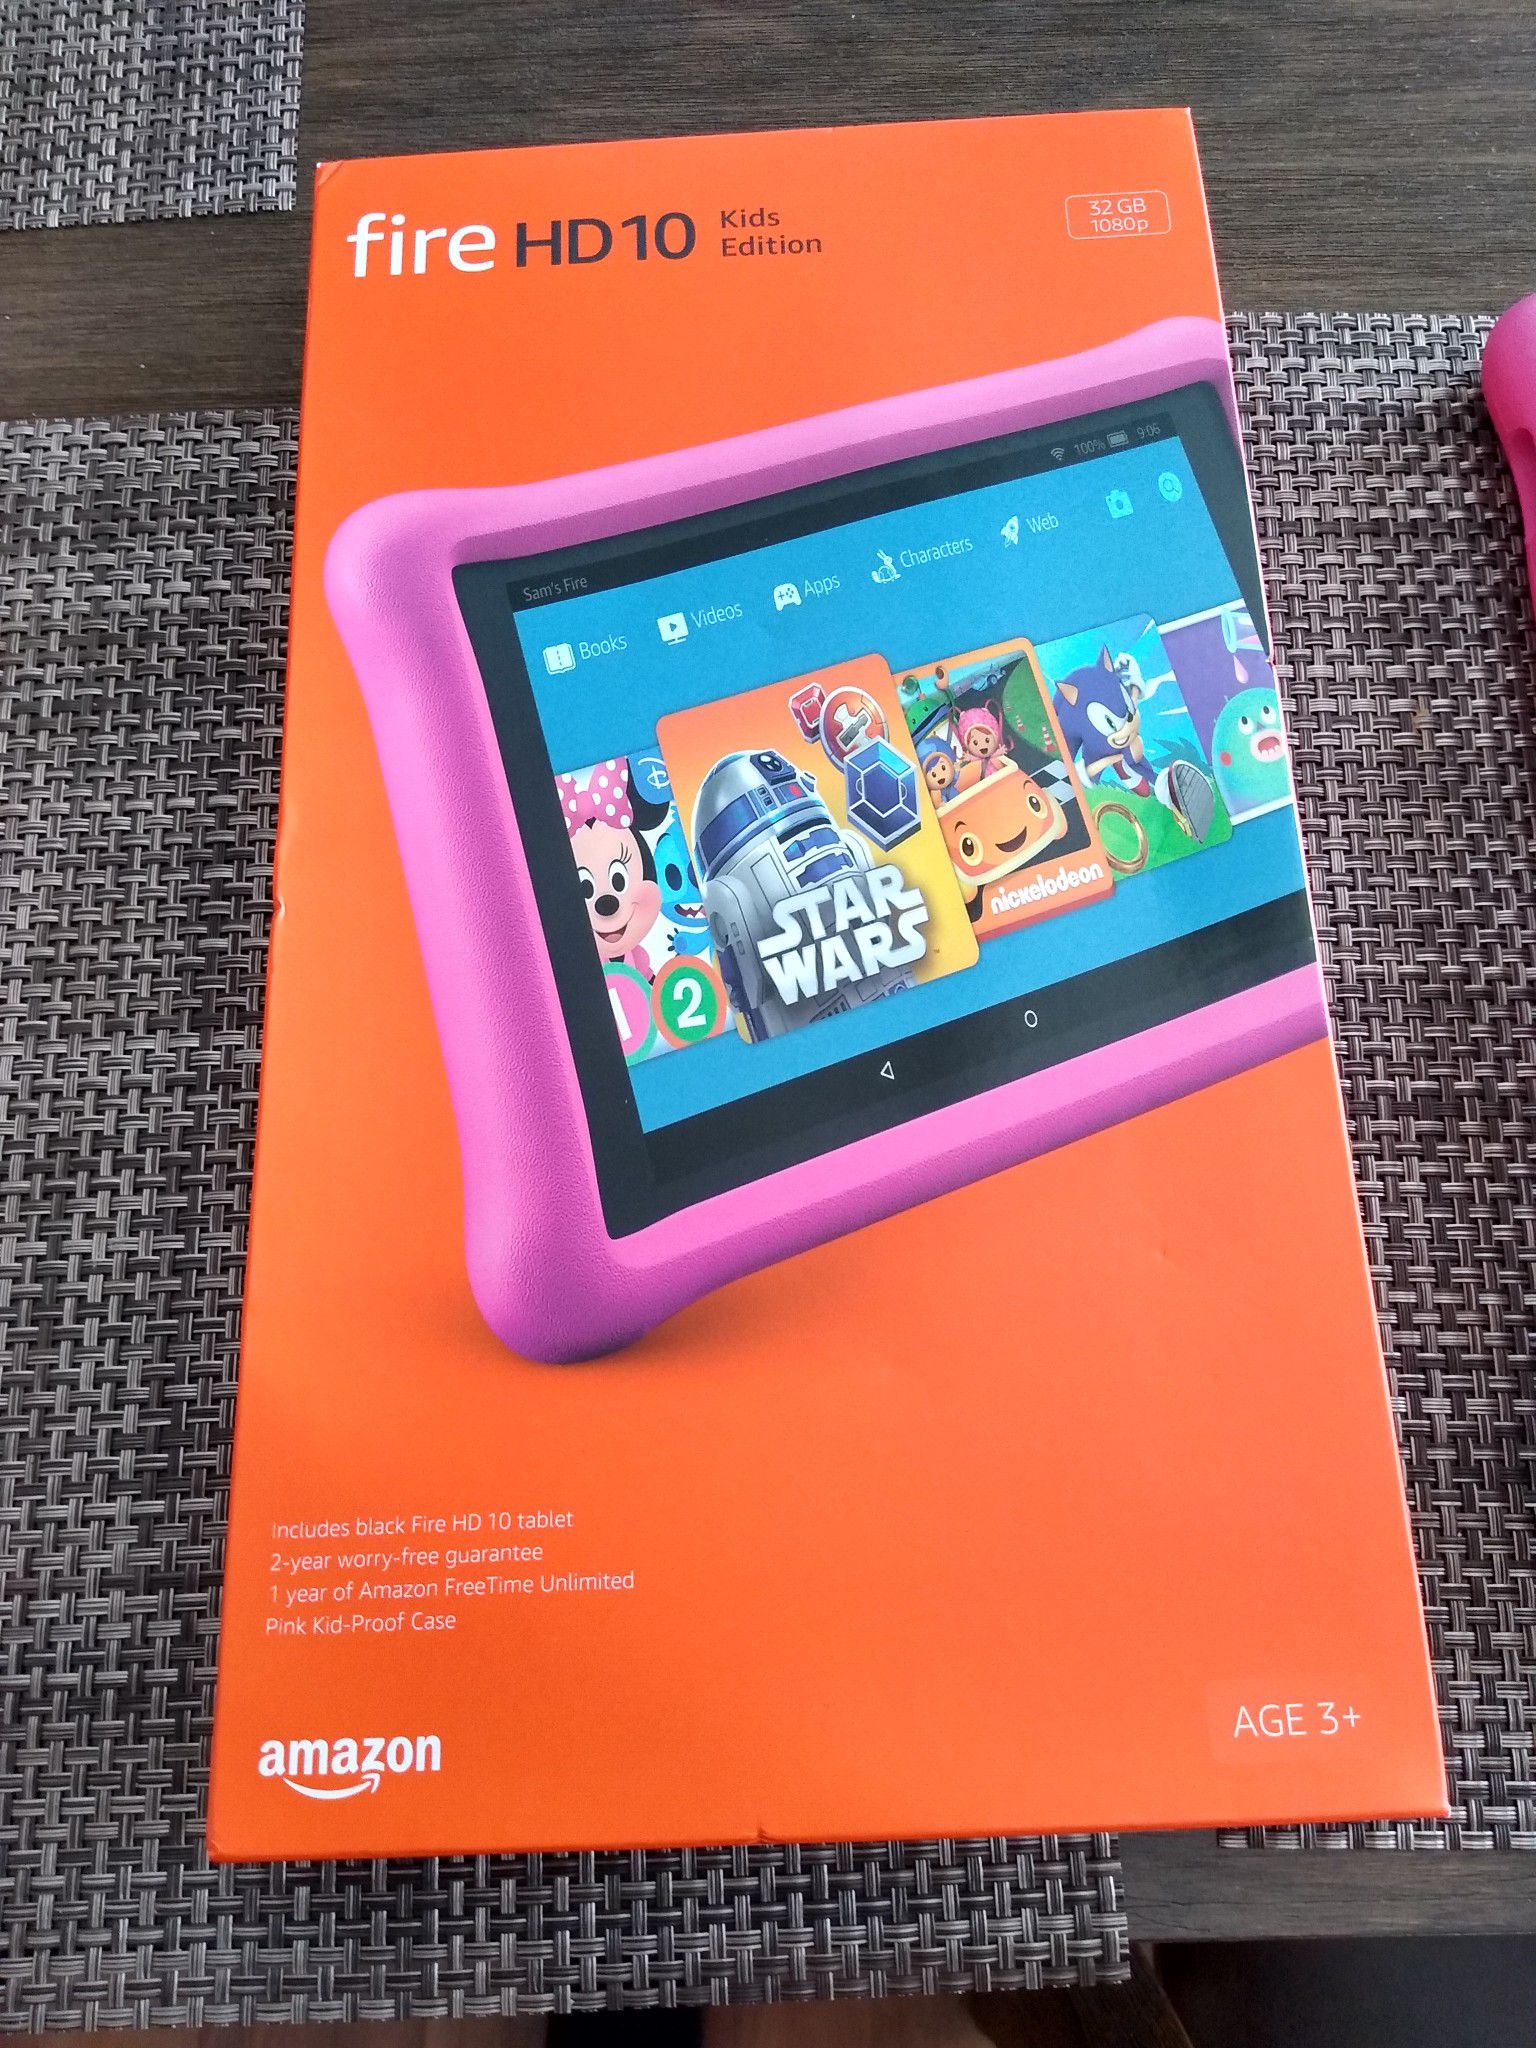 Amazon - Fire HD 10 Kids Edition - 10.1" - Tablet - 32GB - Pink